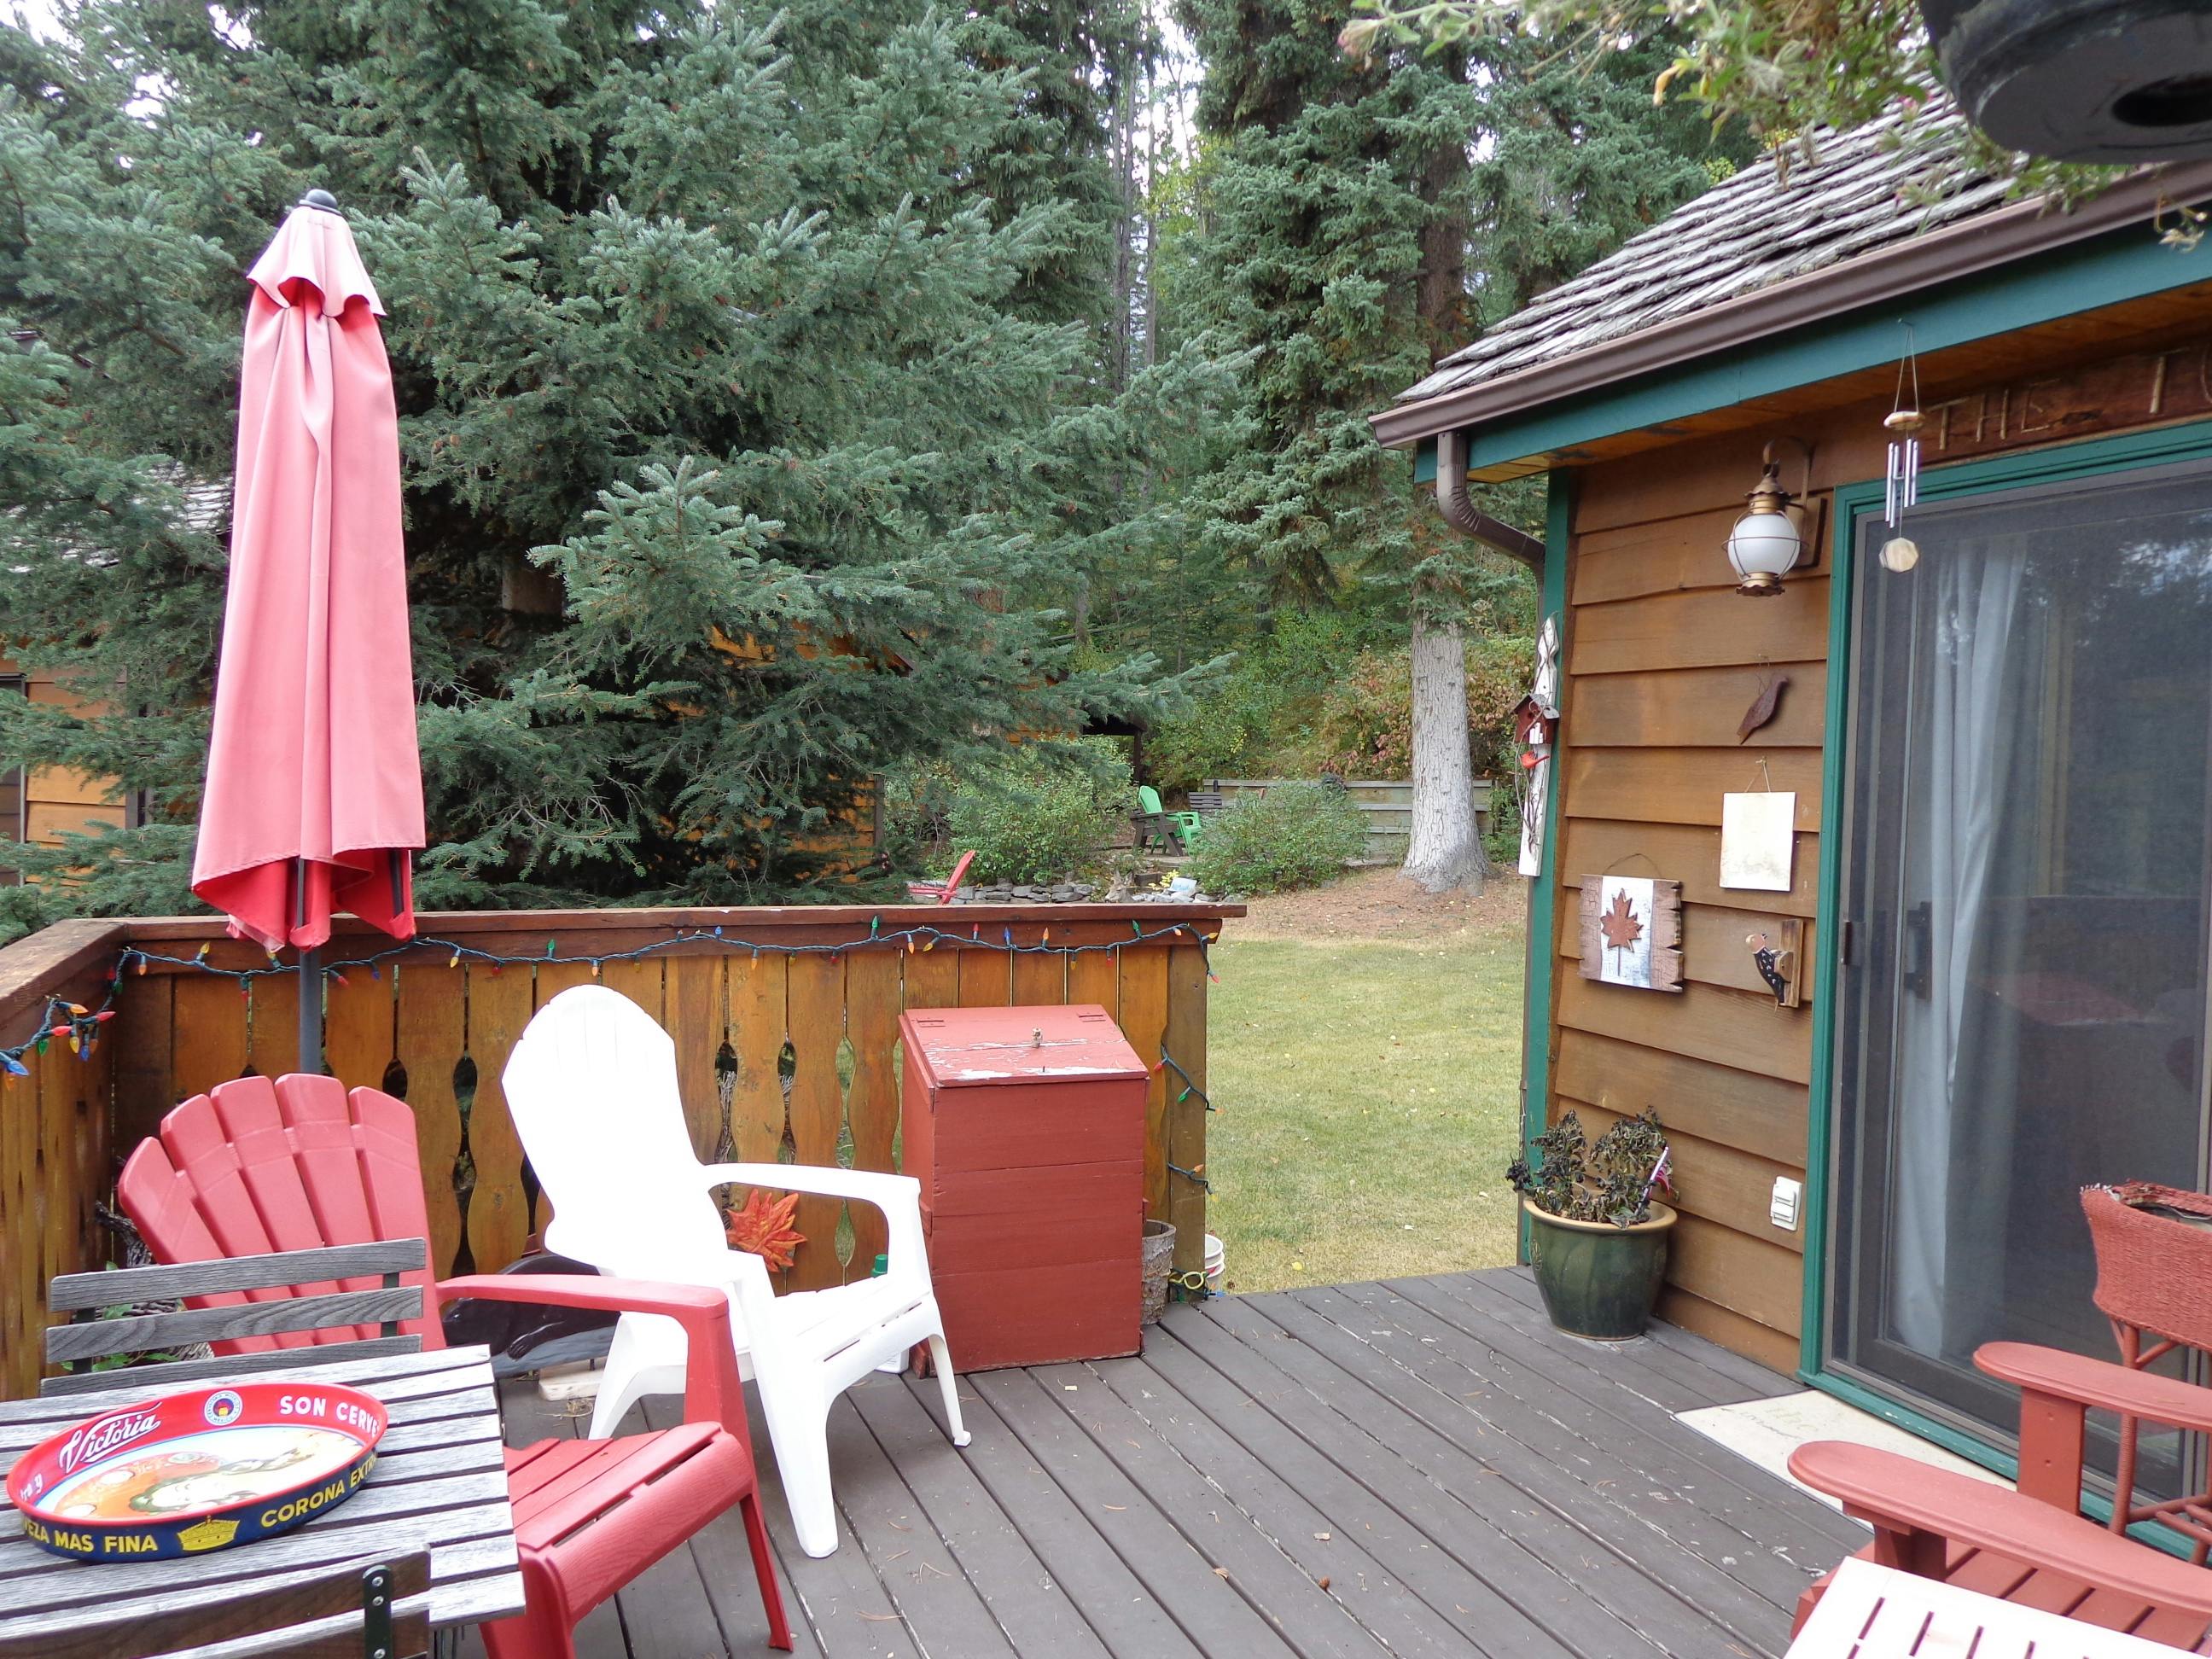 Relax or BBQ on the front deck when the weather is good